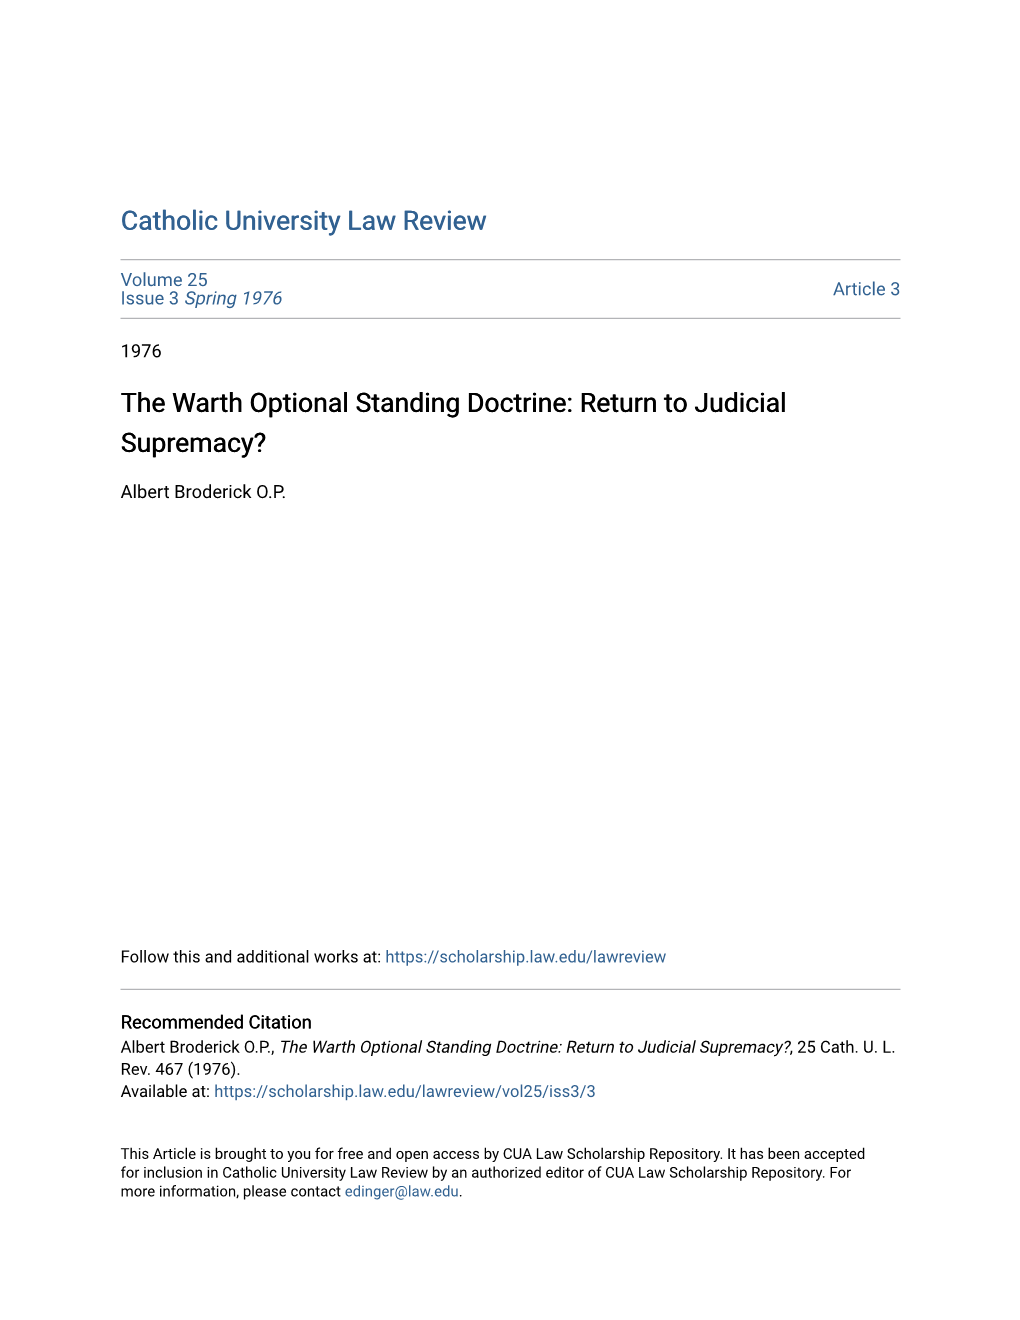 The Warth Optional Standing Doctrine: Return to Judicial Supremacy?